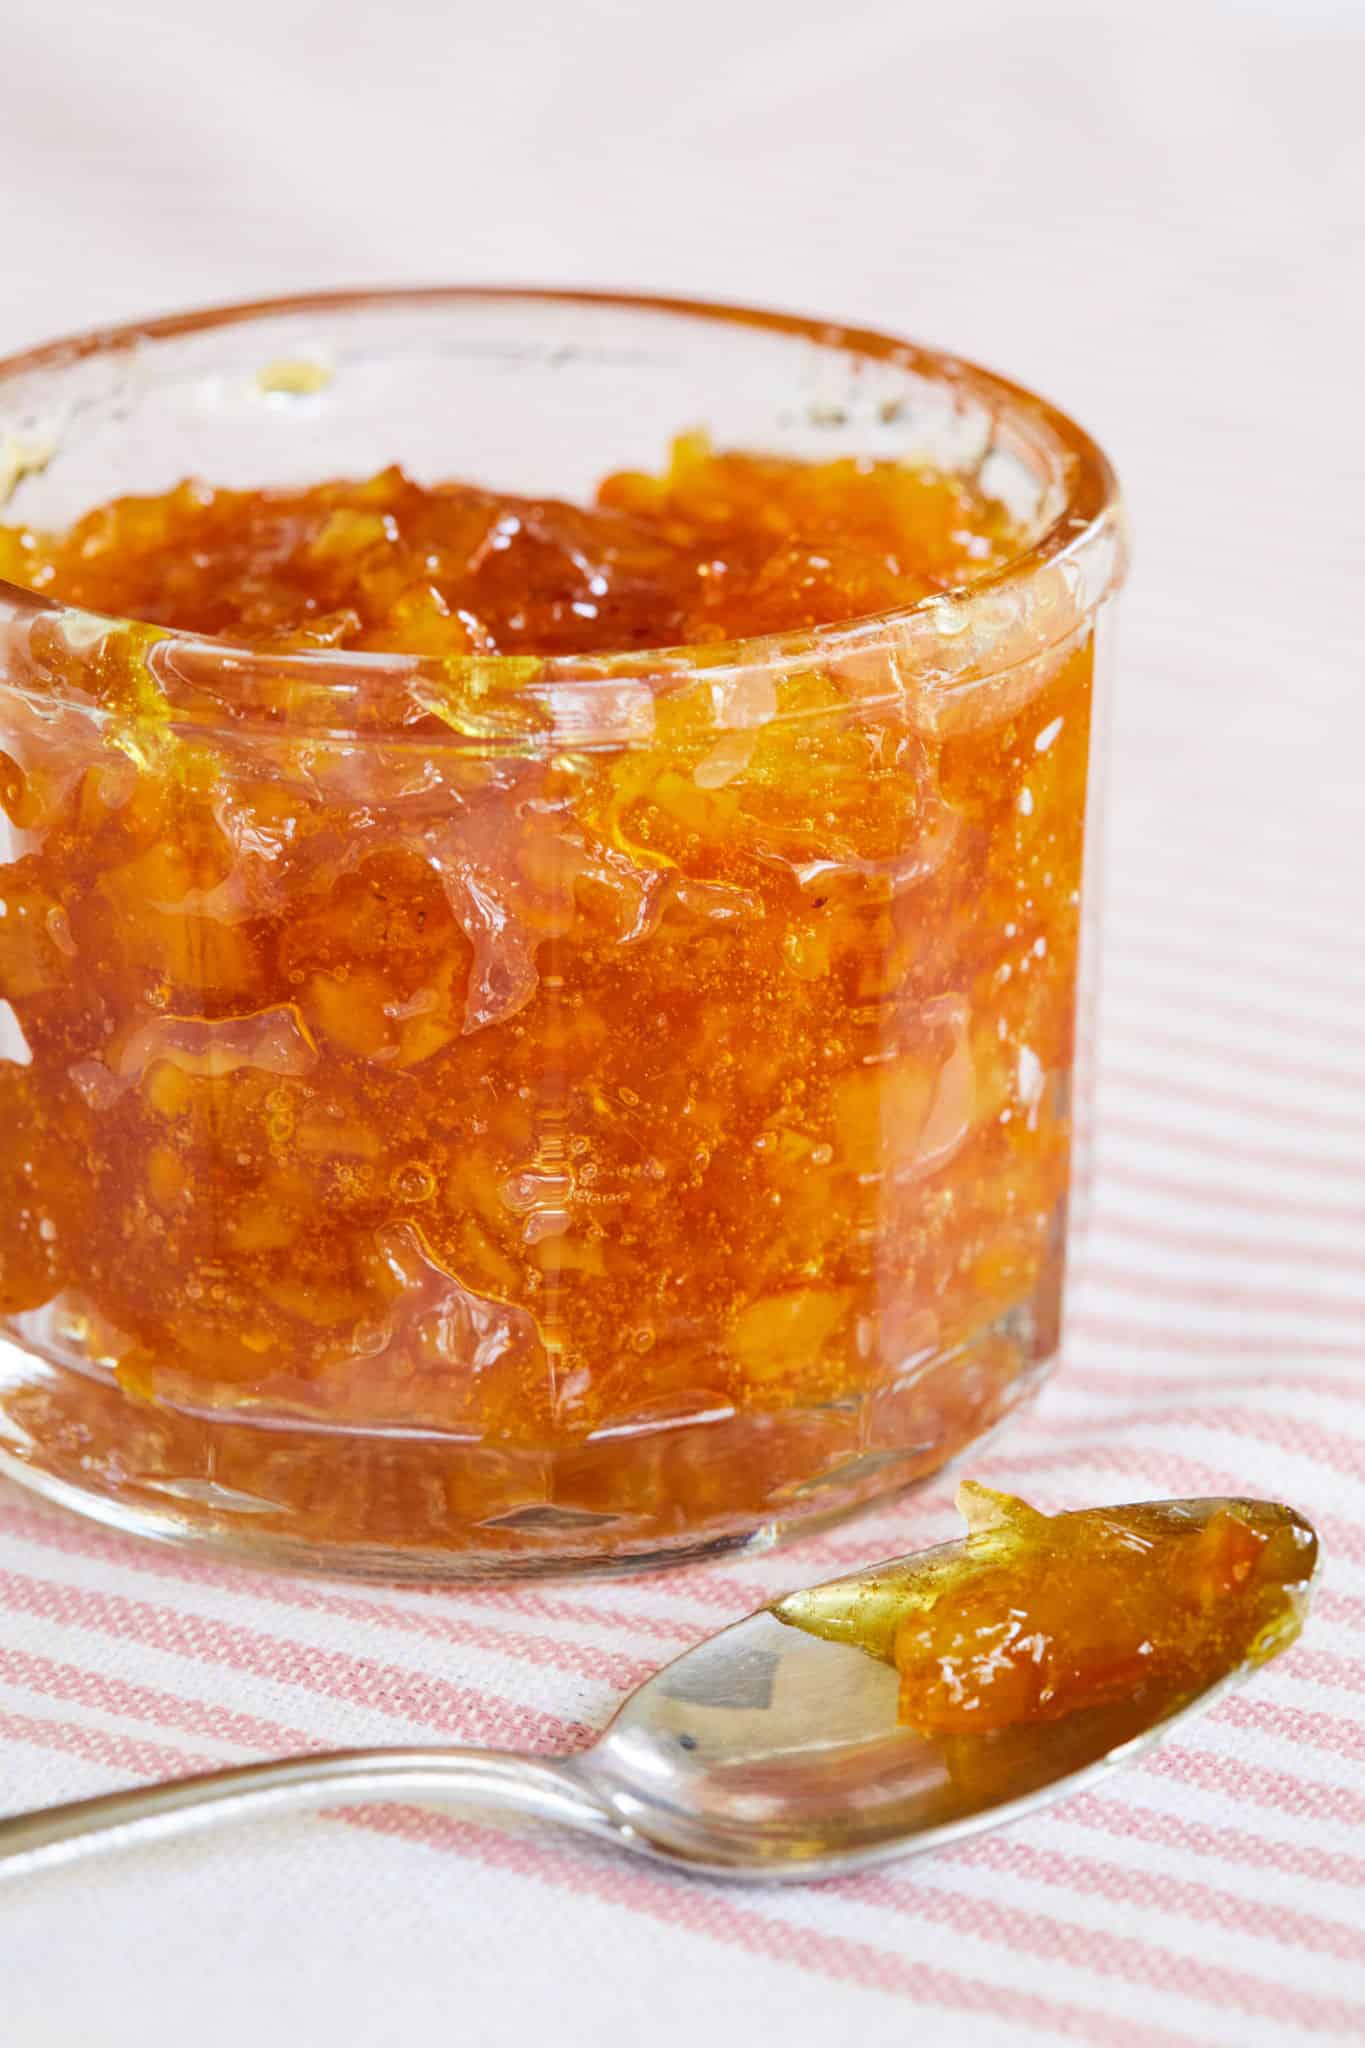 Orange Marmalade in a jar, with a spoon next to it.